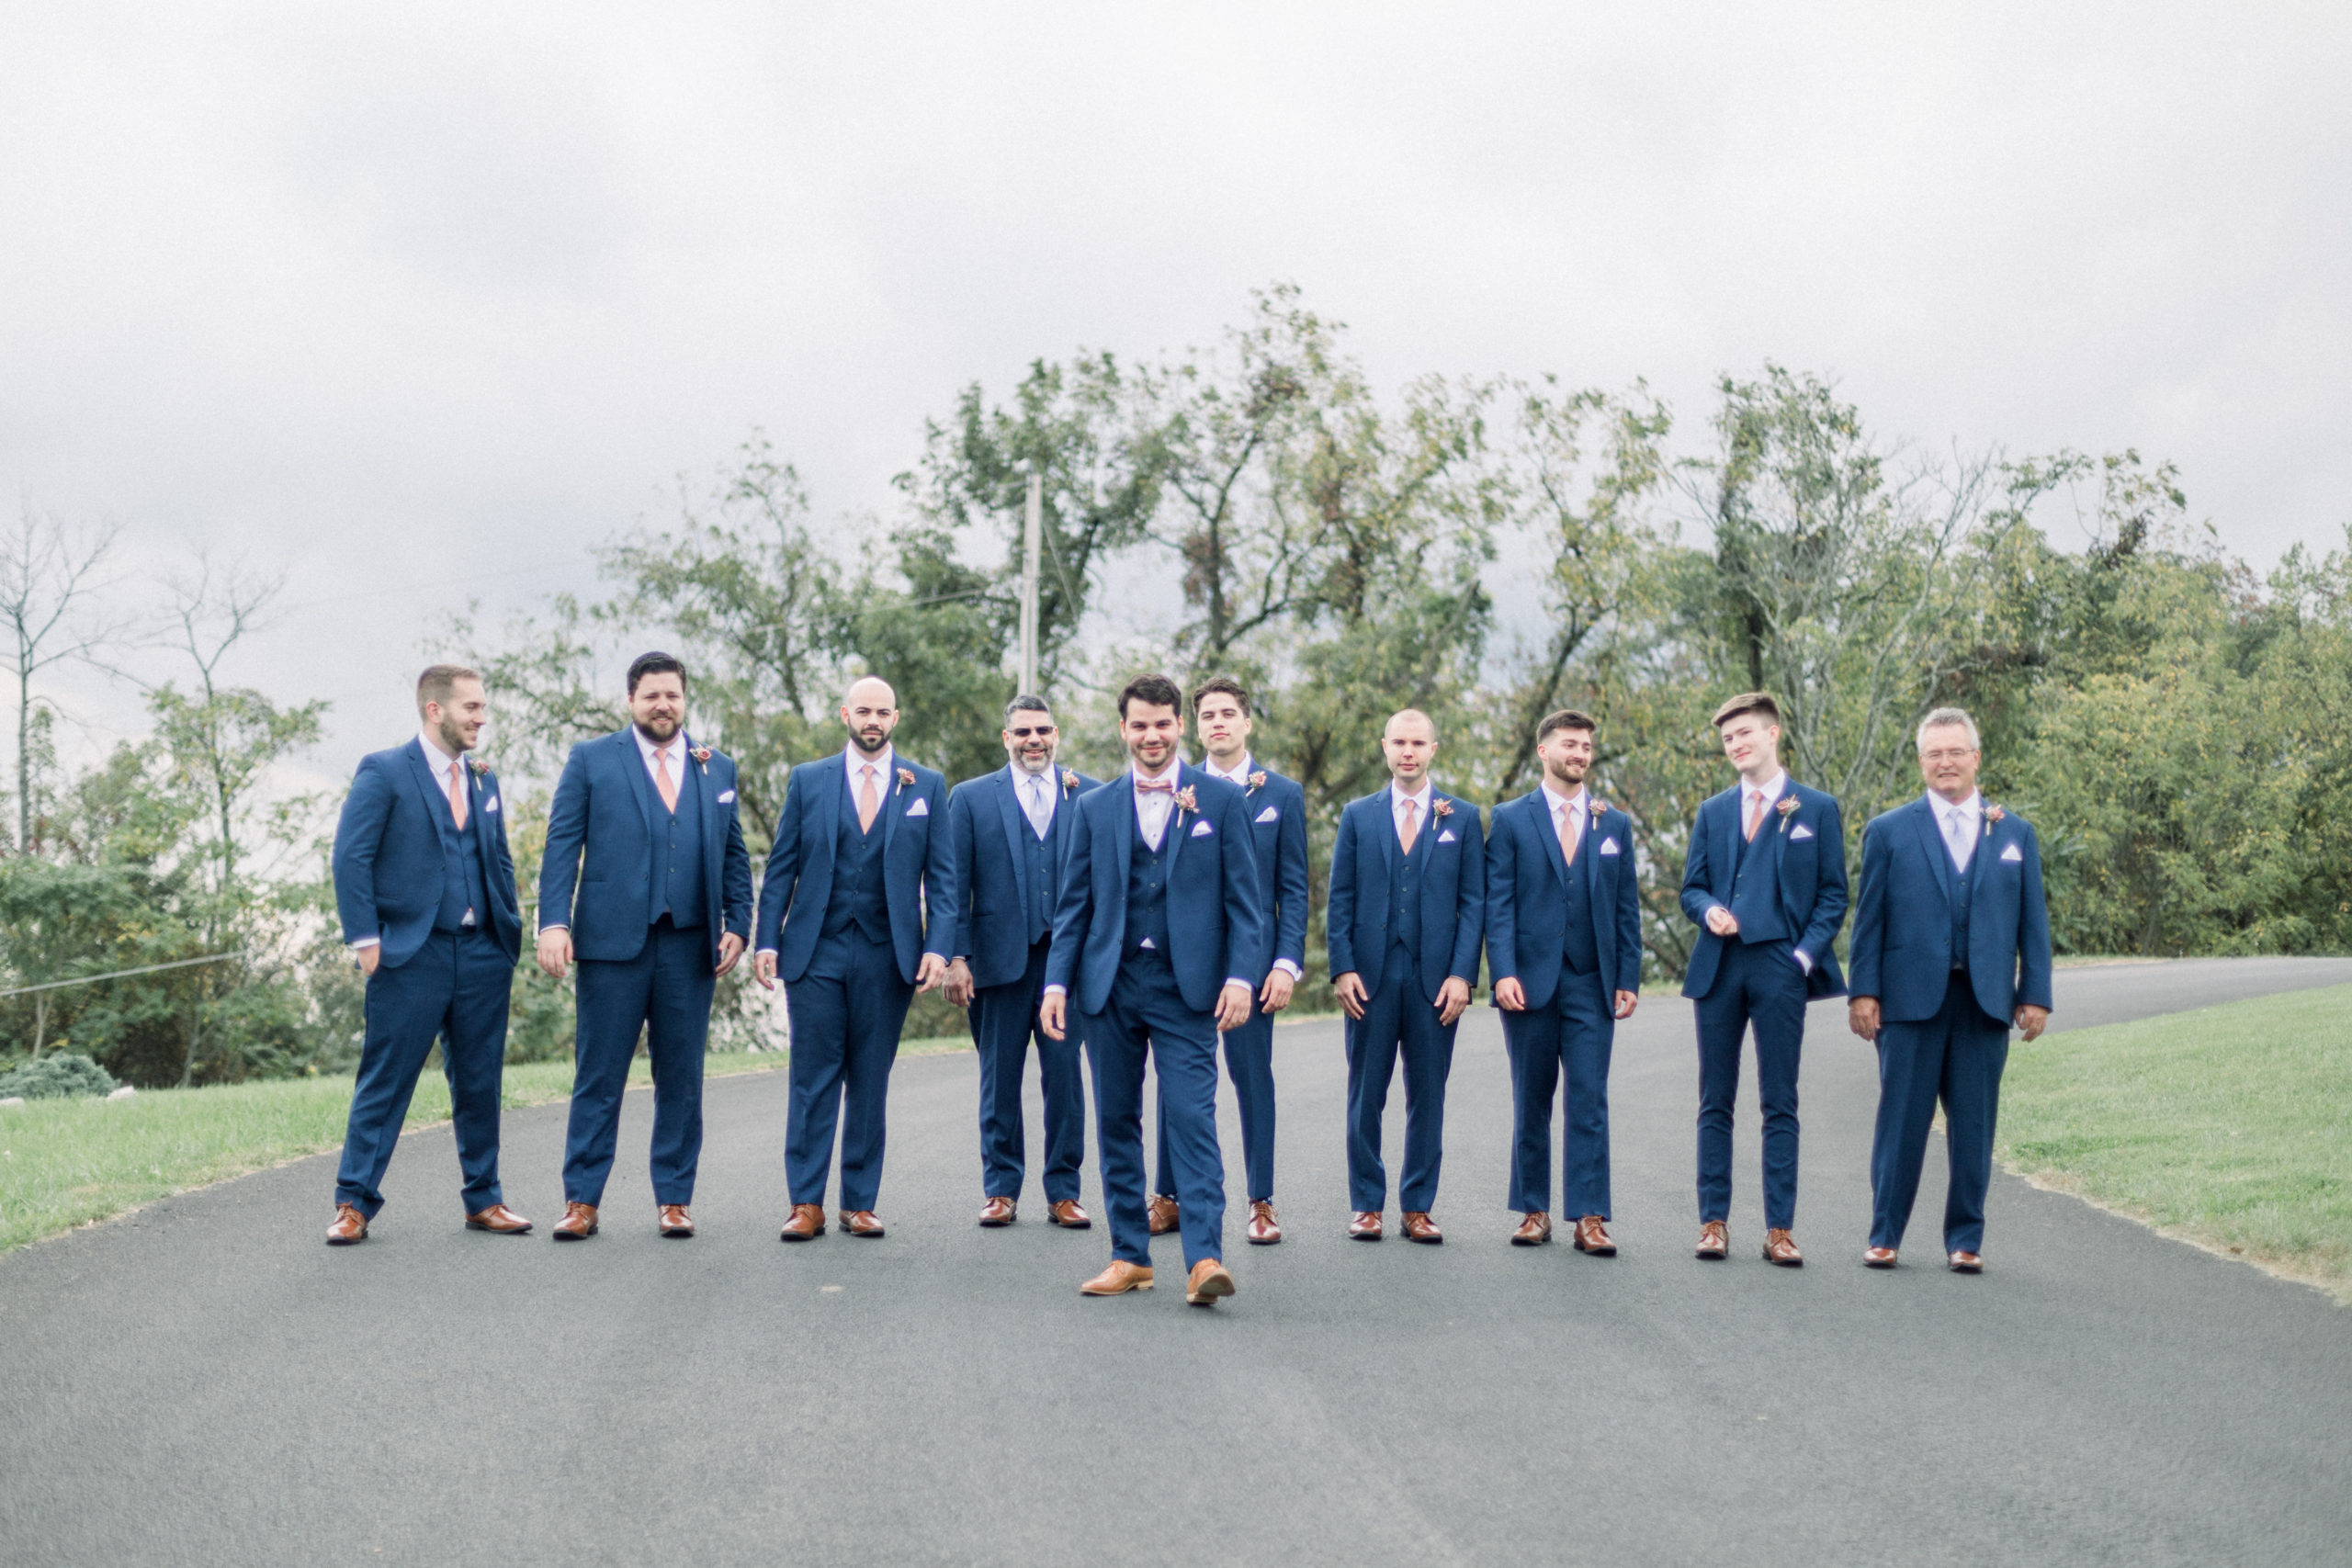 groom standing with groomsmen all wearing navy suits and pink ties before stunning lodges at gettysburg wedding ceremony